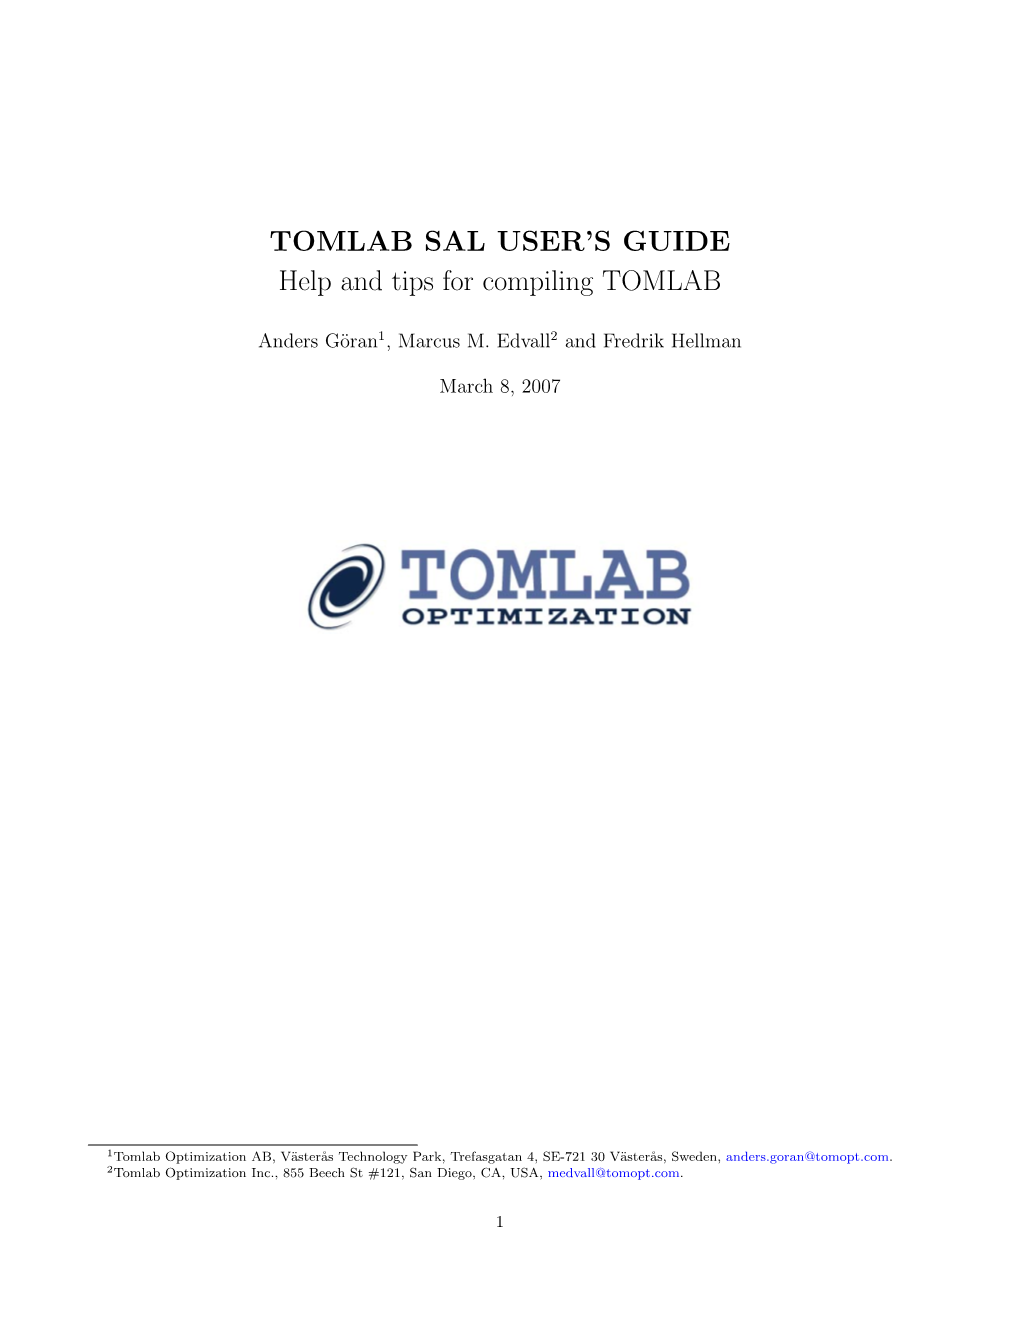 TOMLAB SAL USER’S GUIDE Help and Tips for Compiling TOMLAB